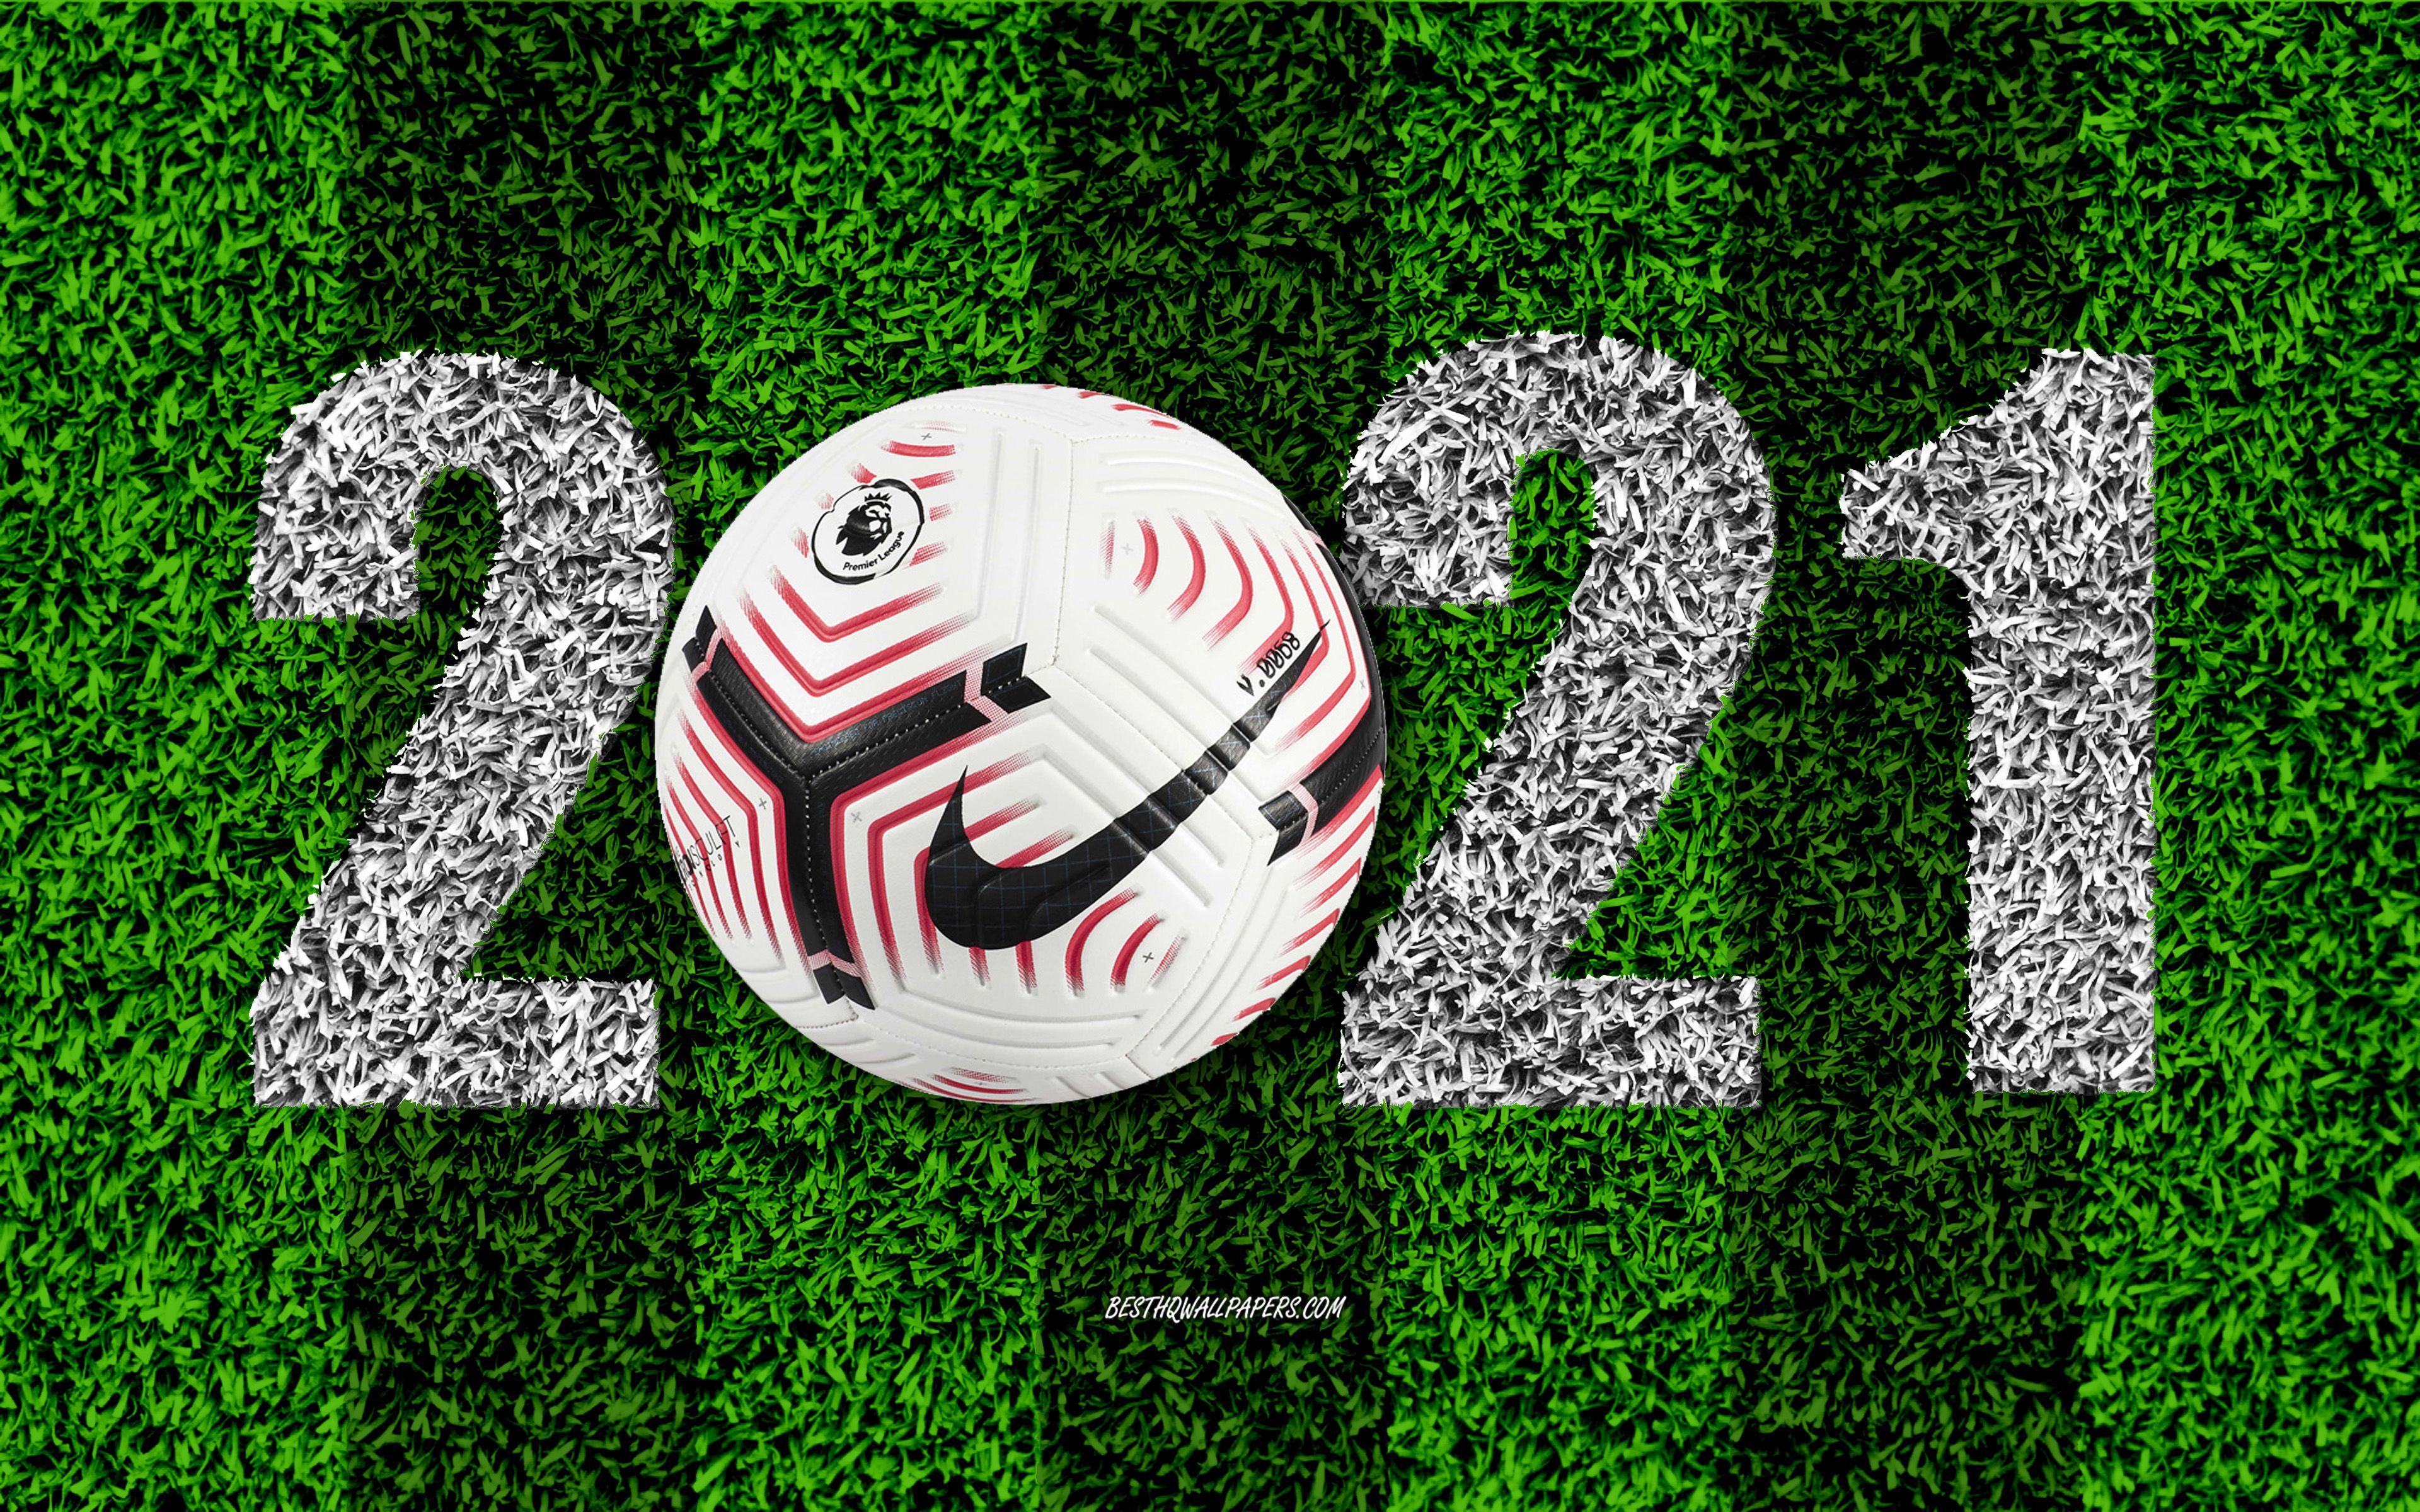 Download wallpaper Premier League football field, 2021 New Year, 2021 Premier League official ball, Nike Aerowsculpt England, football, 2021 concepts, Premier League for desktop with resolution 3840x2400. High Quality HD picture wallpaper